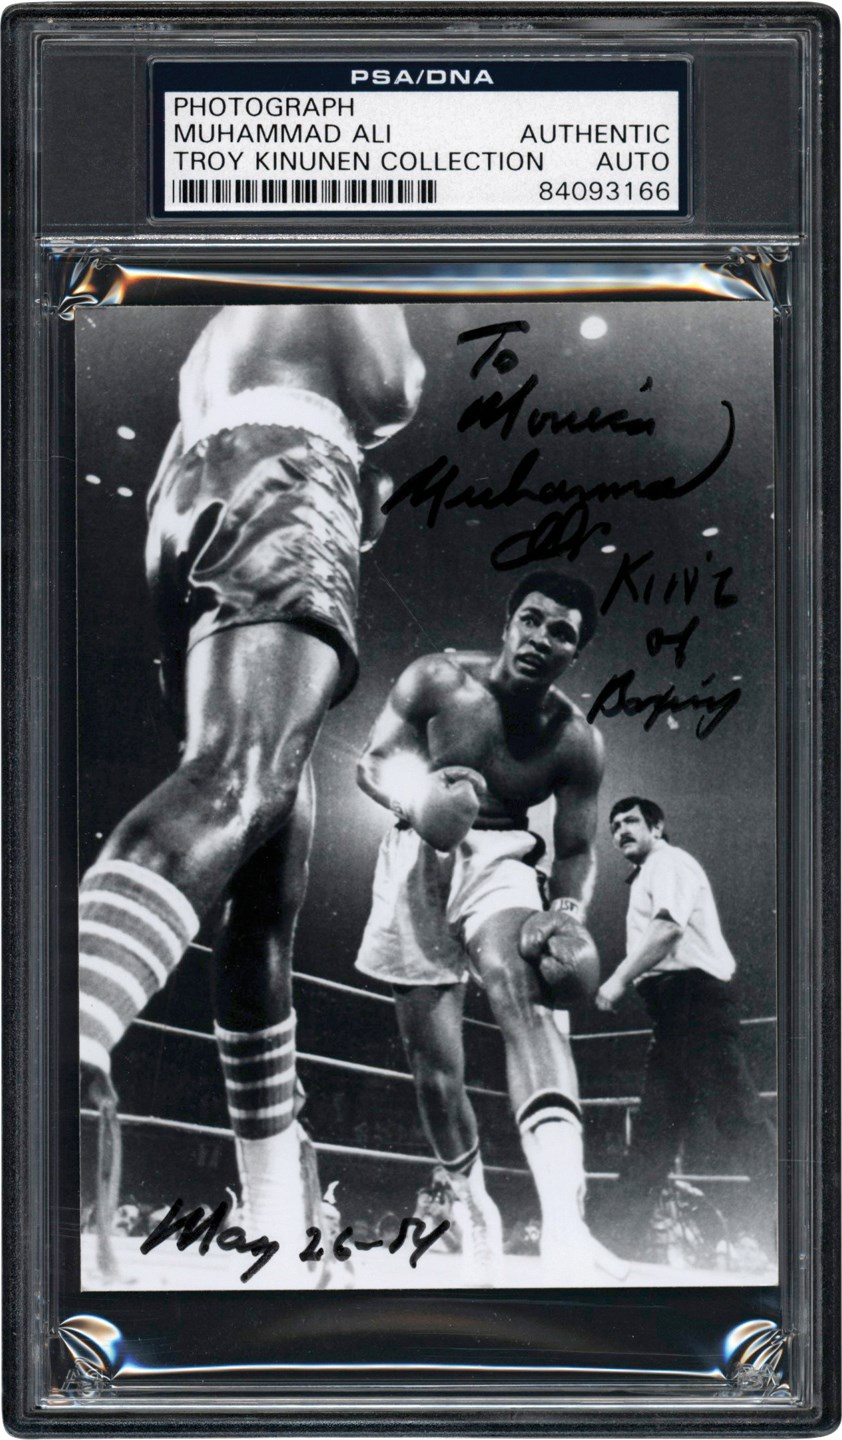 - Muhammad Ali Signed & Inscribed "King of Boxing" Photograph (PSA)